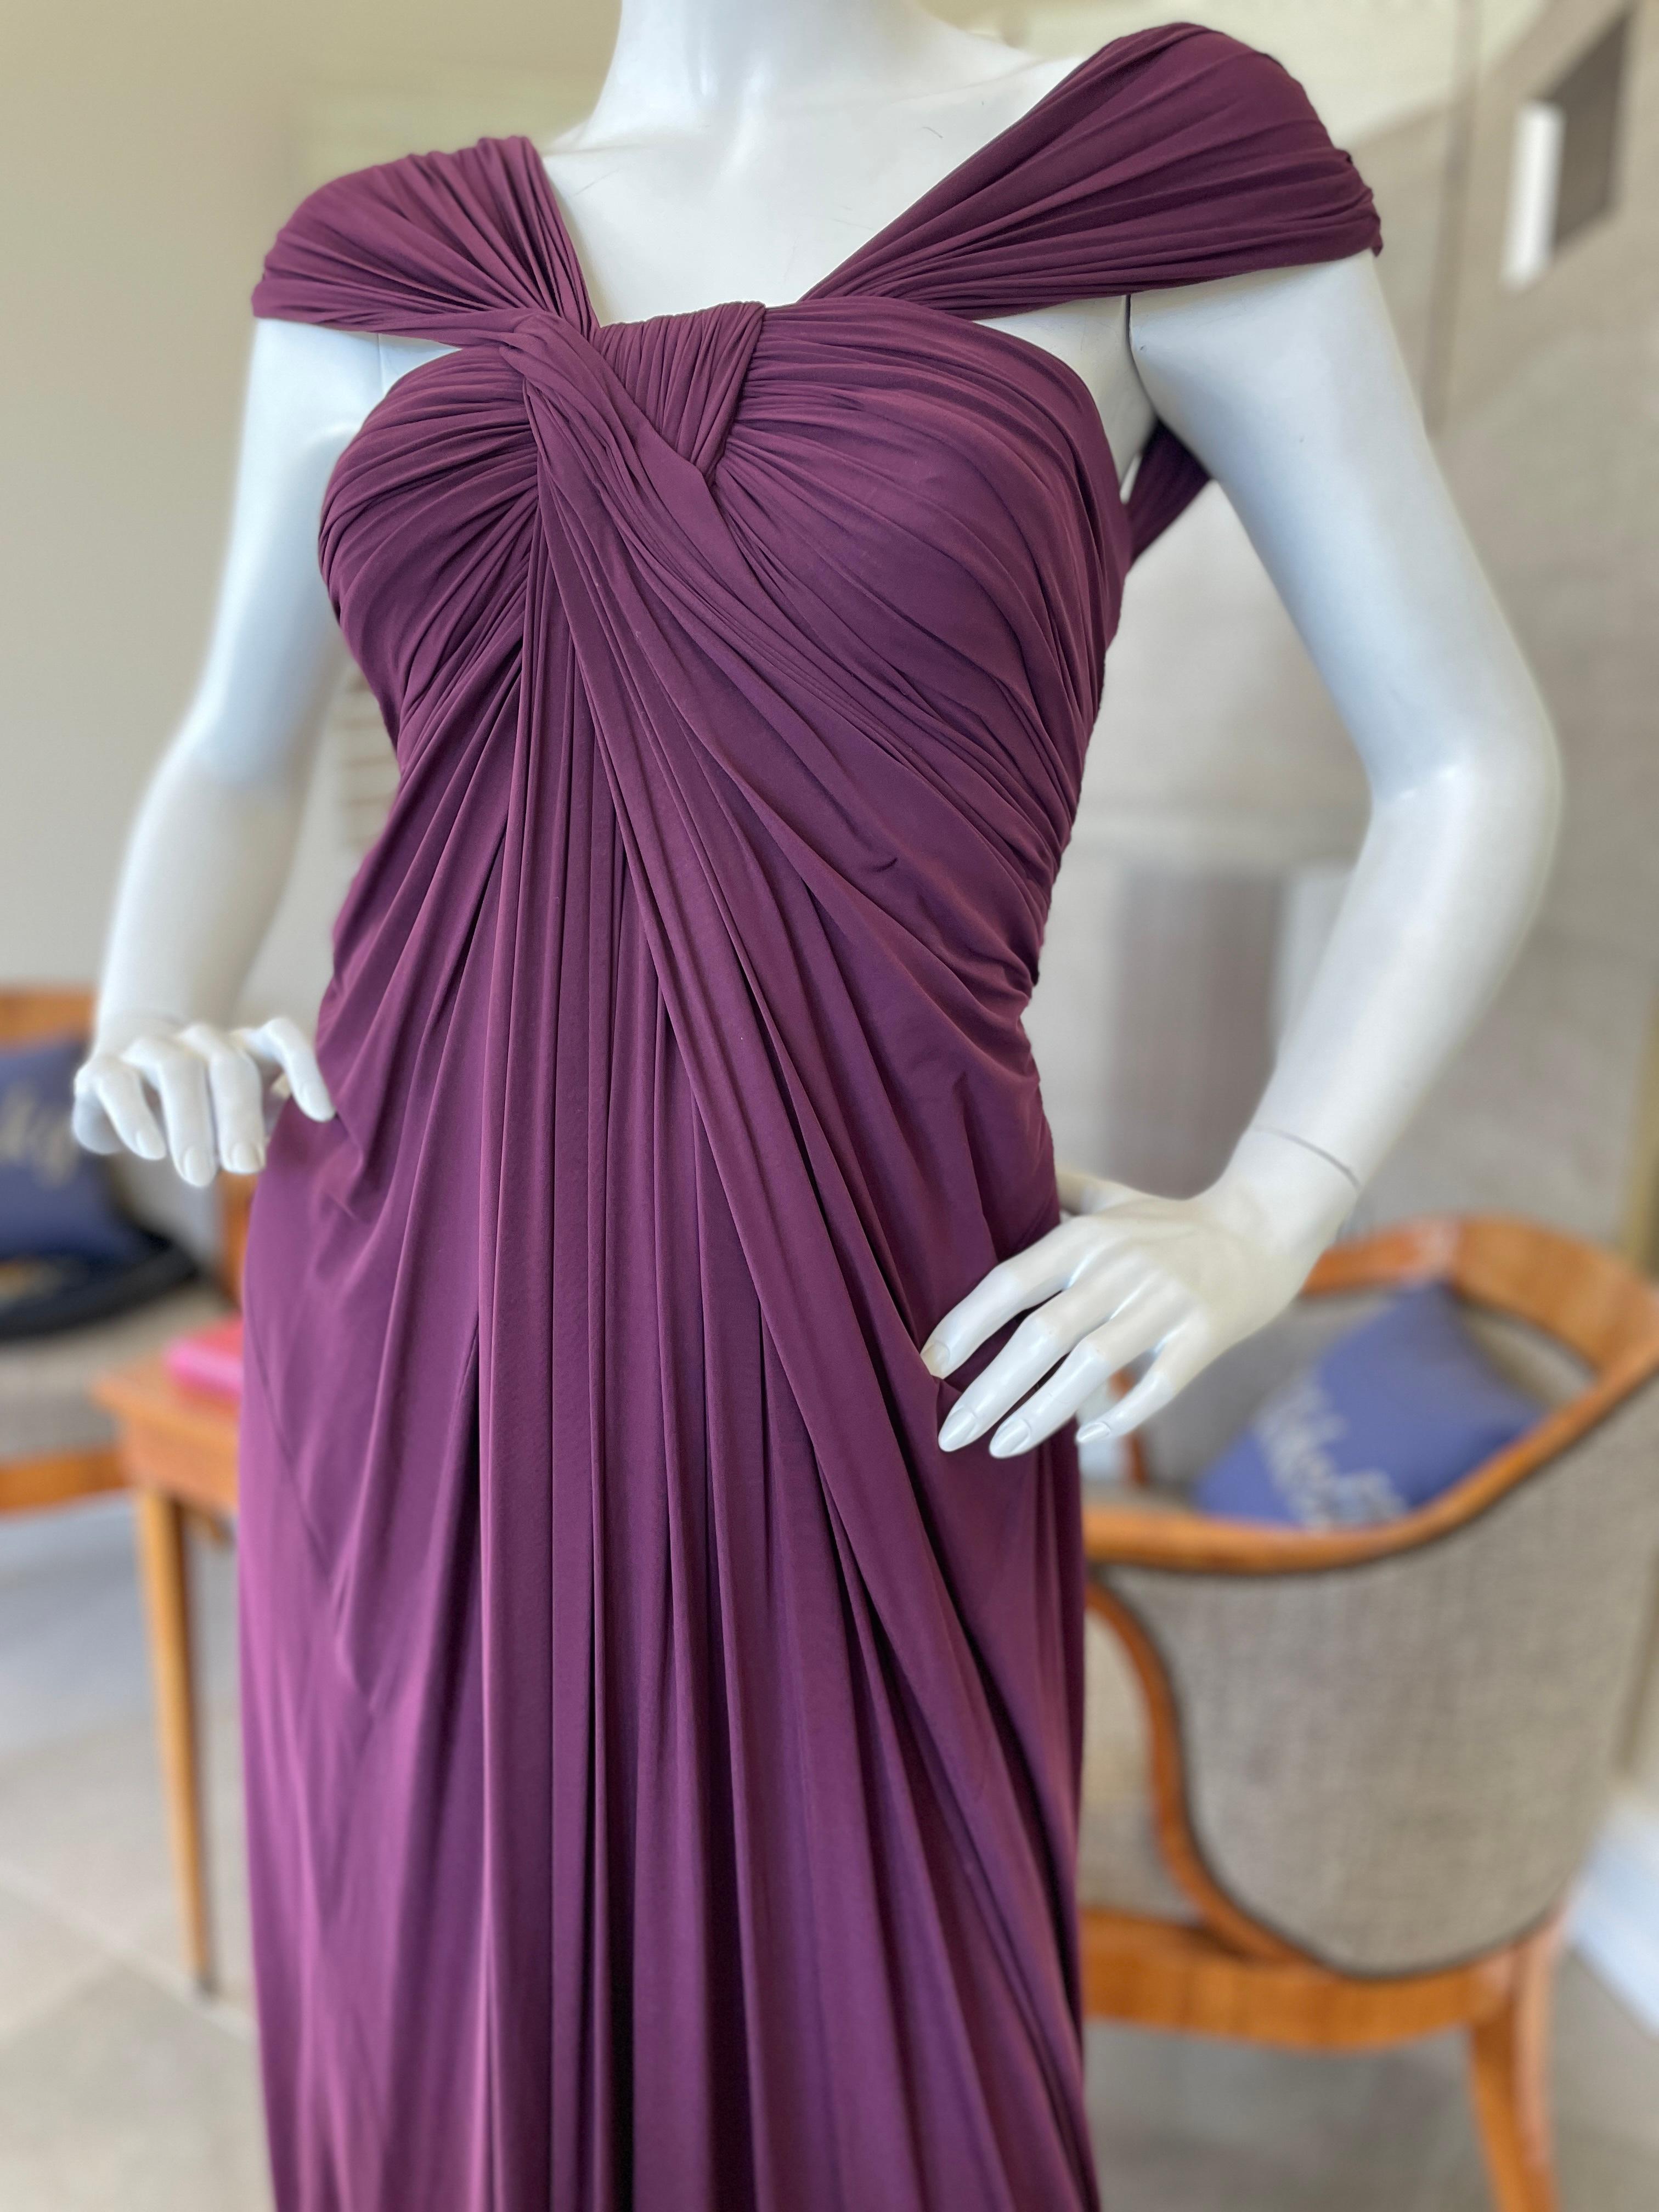 Donna Karan Vintage 1990's Purple Jersey Draped Evening Dress In Excellent Condition For Sale In Cloverdale, CA